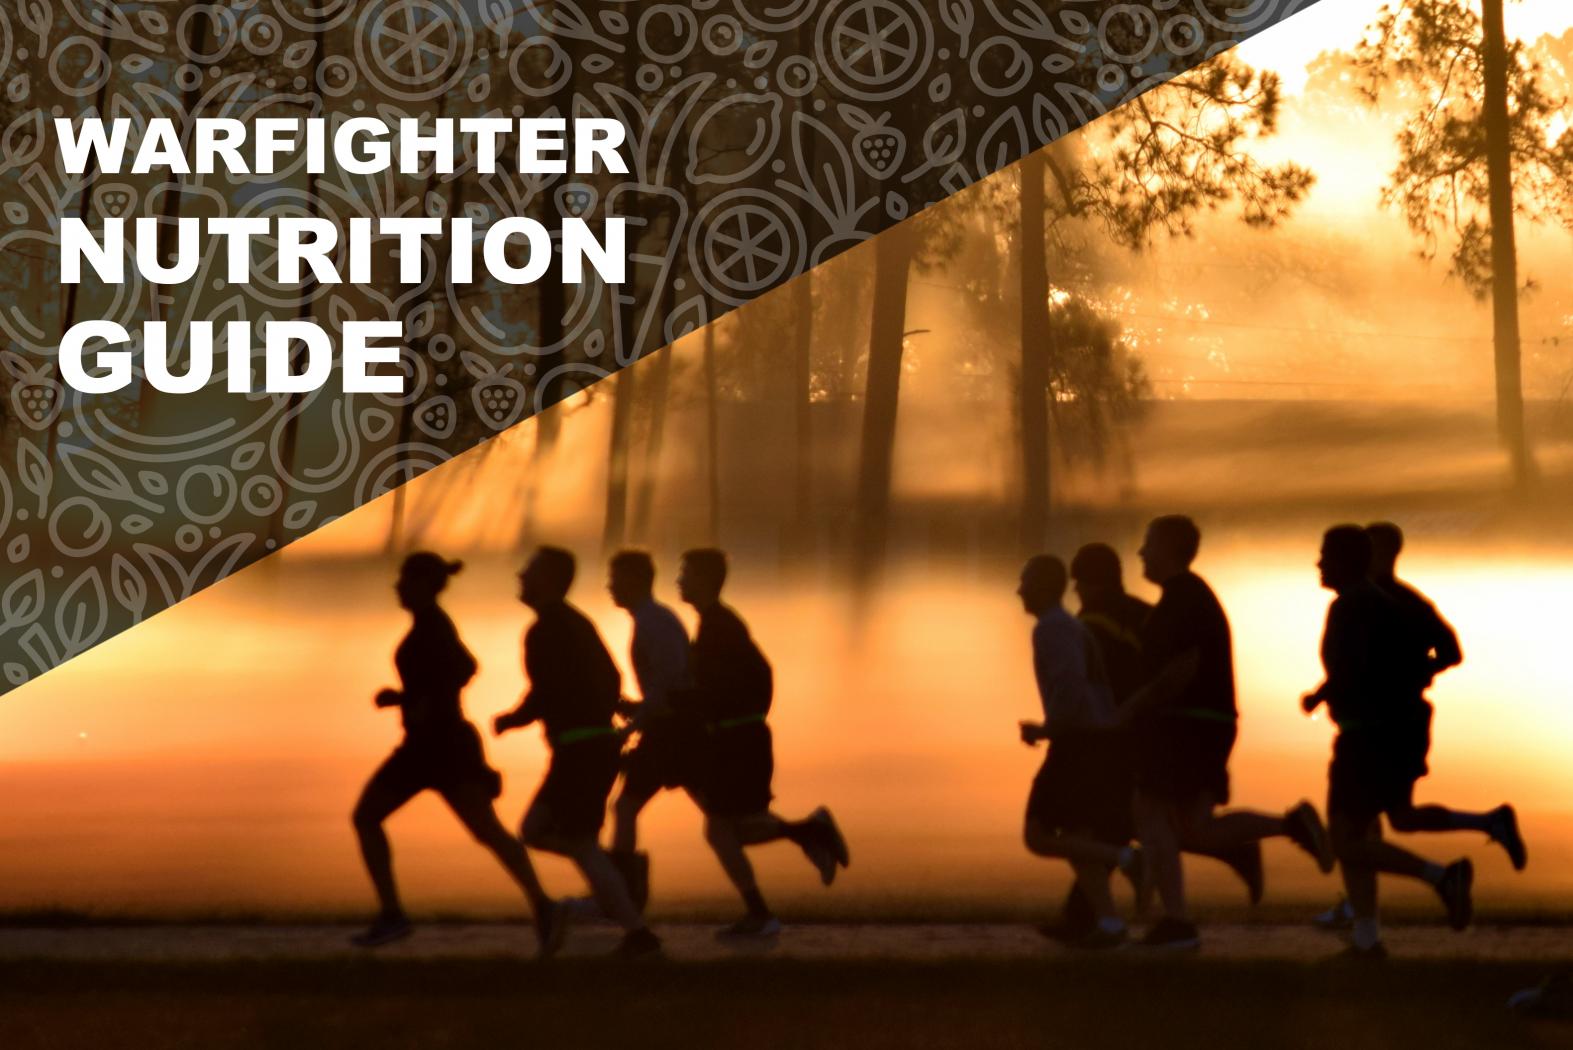 HPRC Warfighter Nutrition Guide. Chapter 10. Silhouette of people running for fitness training at sunrise.